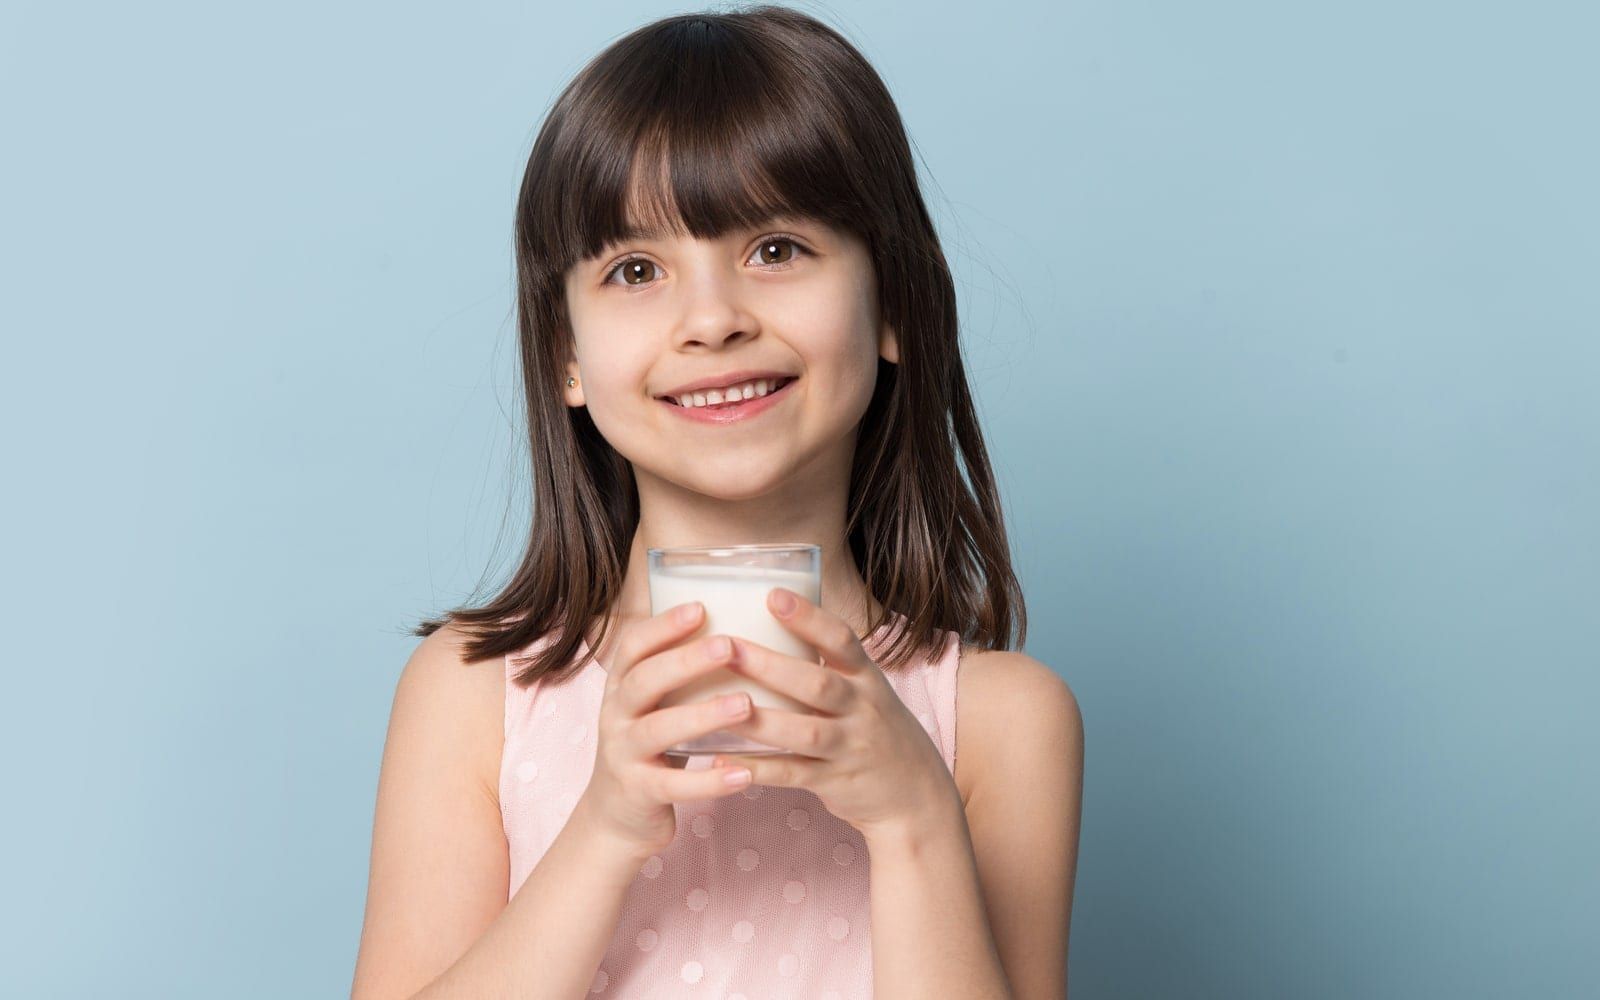 Child holding glass of milk and smiling